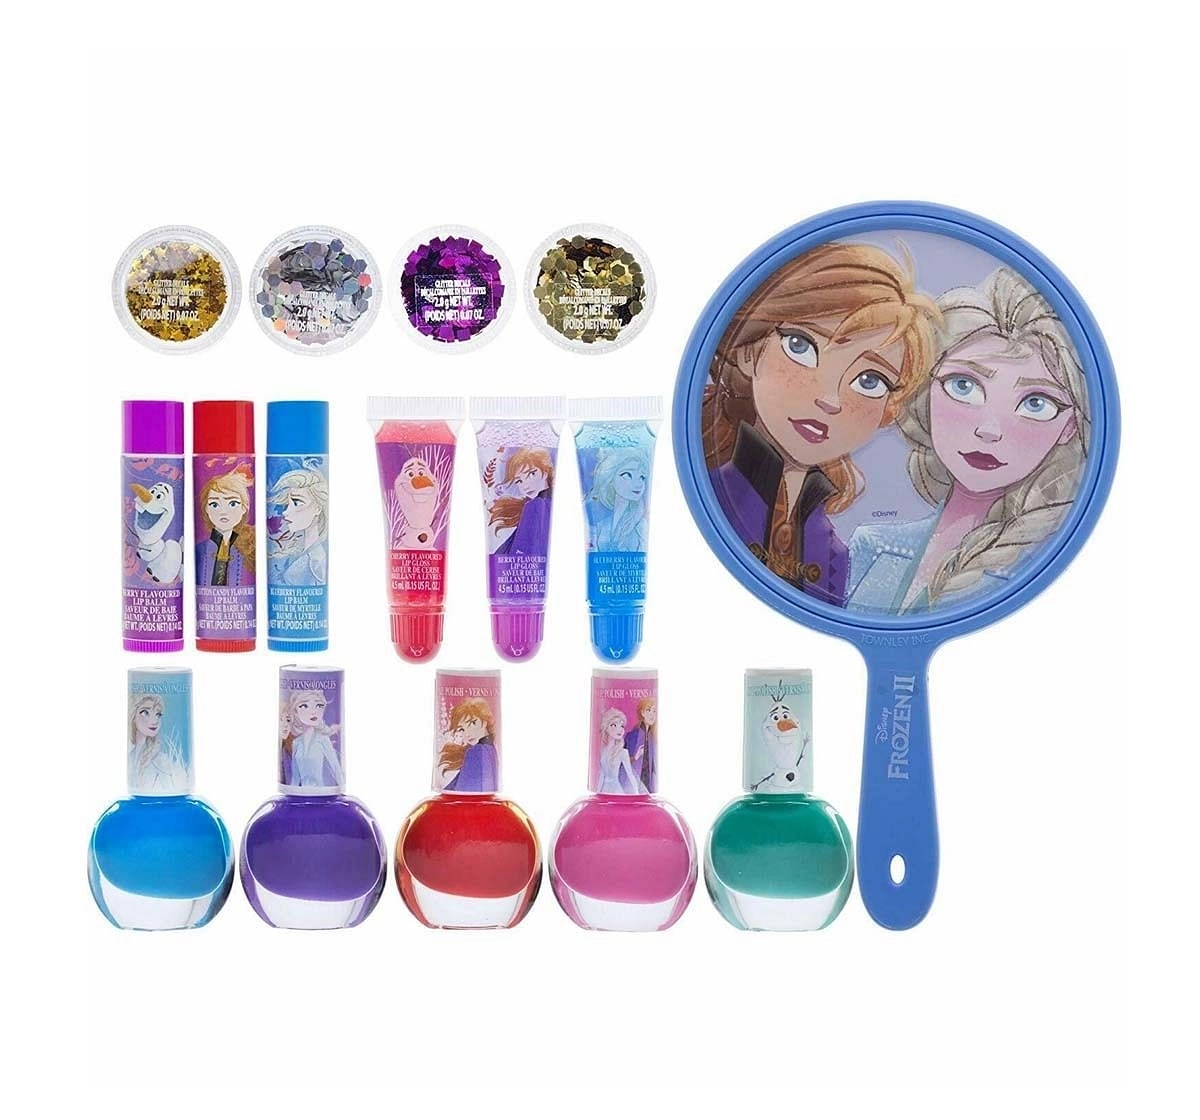 Melissa & Doug Disney Frozen 2 - 16 Piece Lip Balm Cosmetic Gift Set With Light-Up Mirror Toileteries And Makeup for Kids Age 3Y+